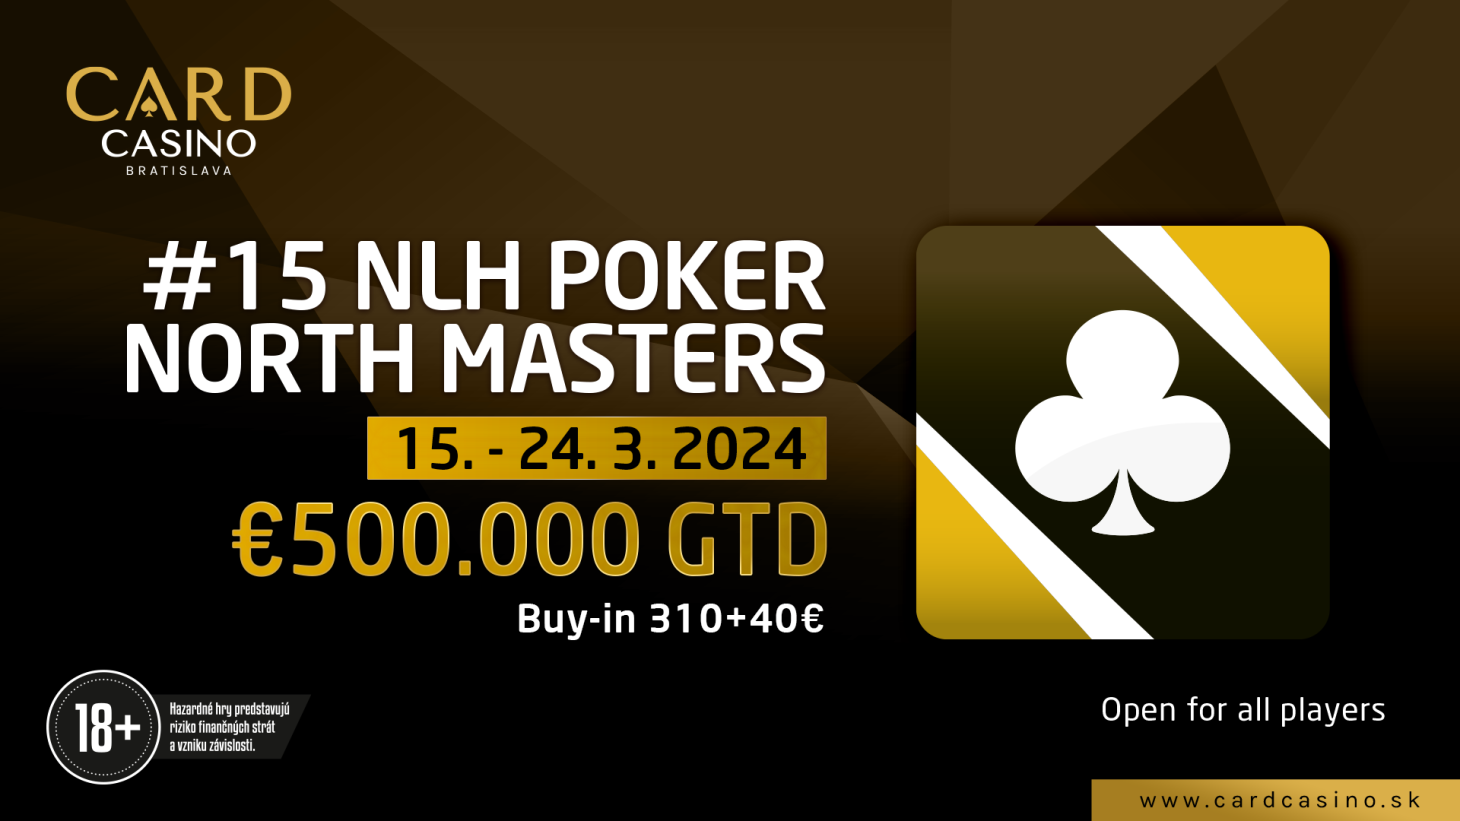 Norway's mega festival PN Masters returns in March with a €500,000 GTD Main Event